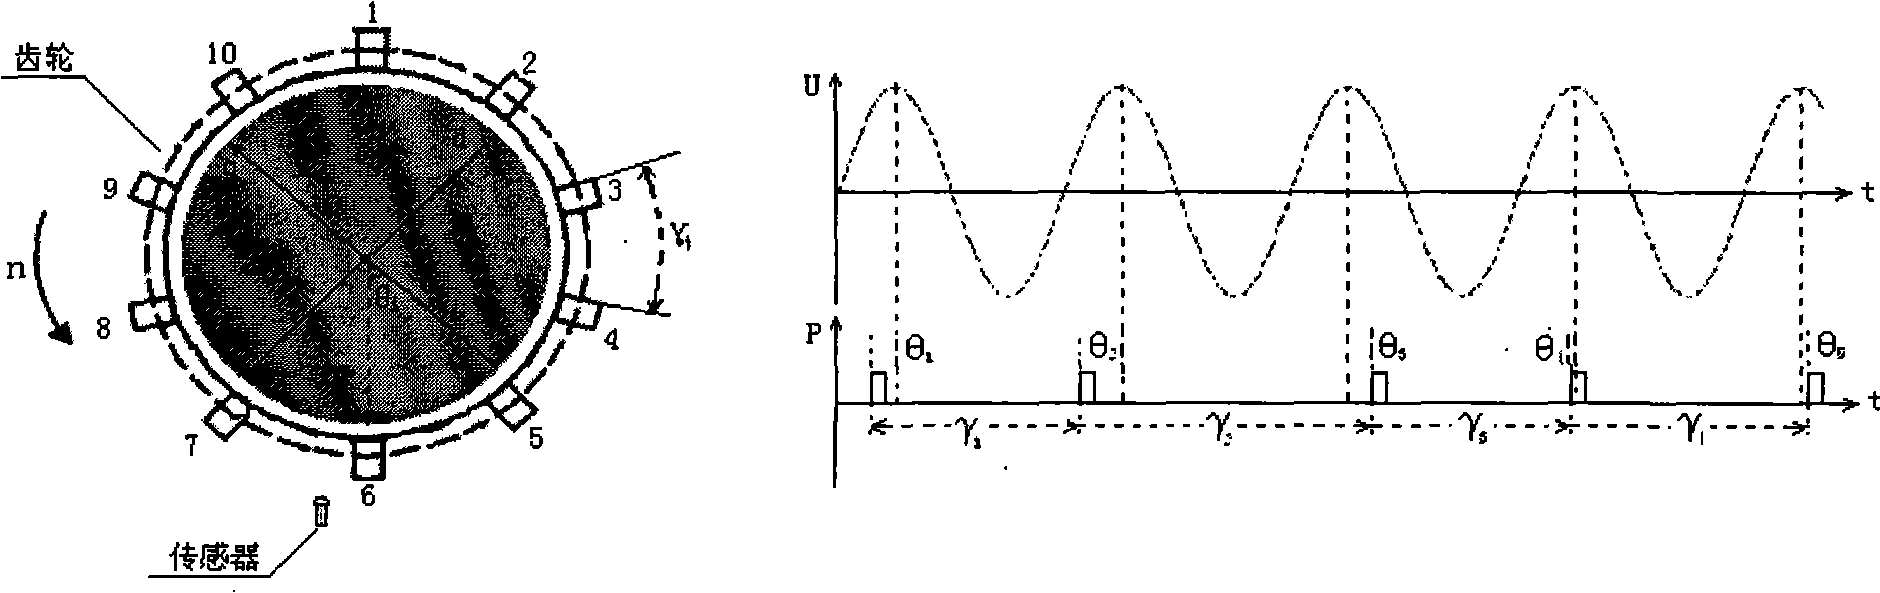 Load angle direct measurement method of hydroelectric synchronous machine